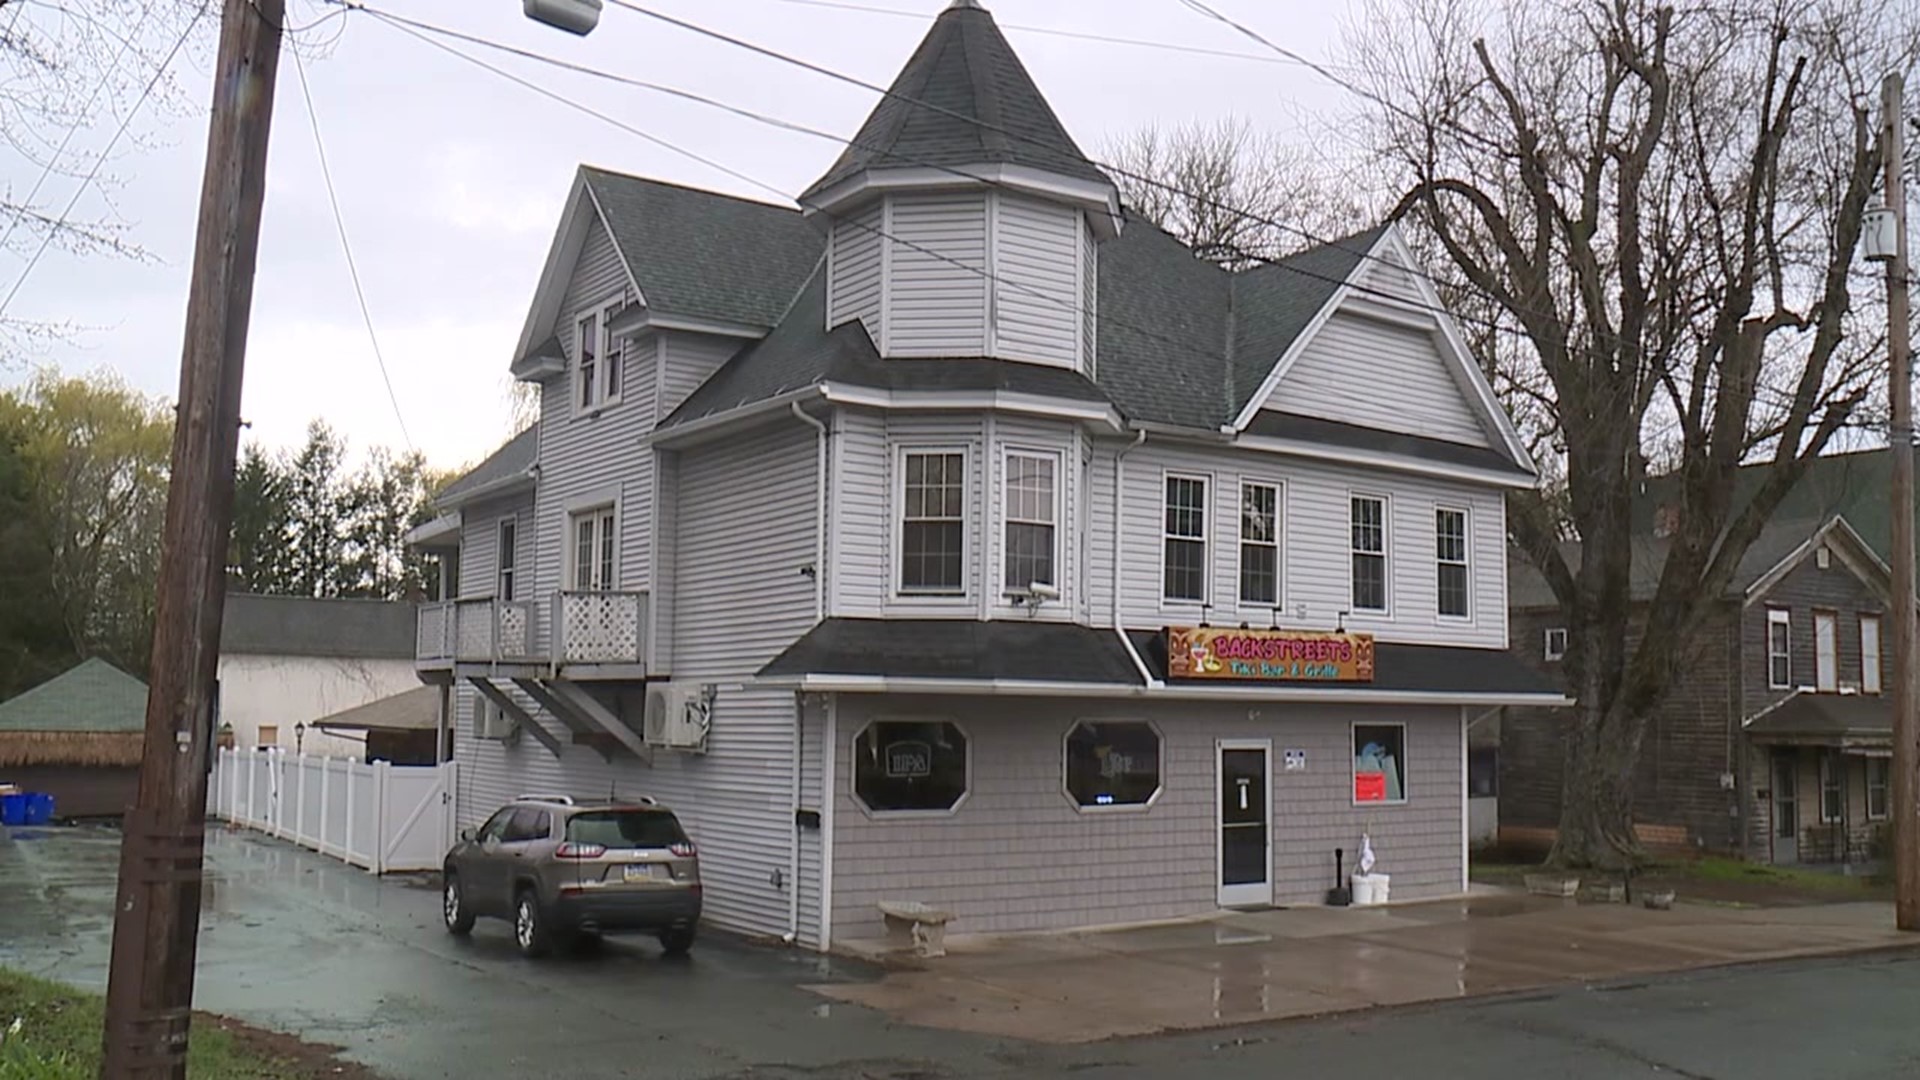 The owner of a bar and restaurant in Scranton says he feels like he was hit while he was already down.